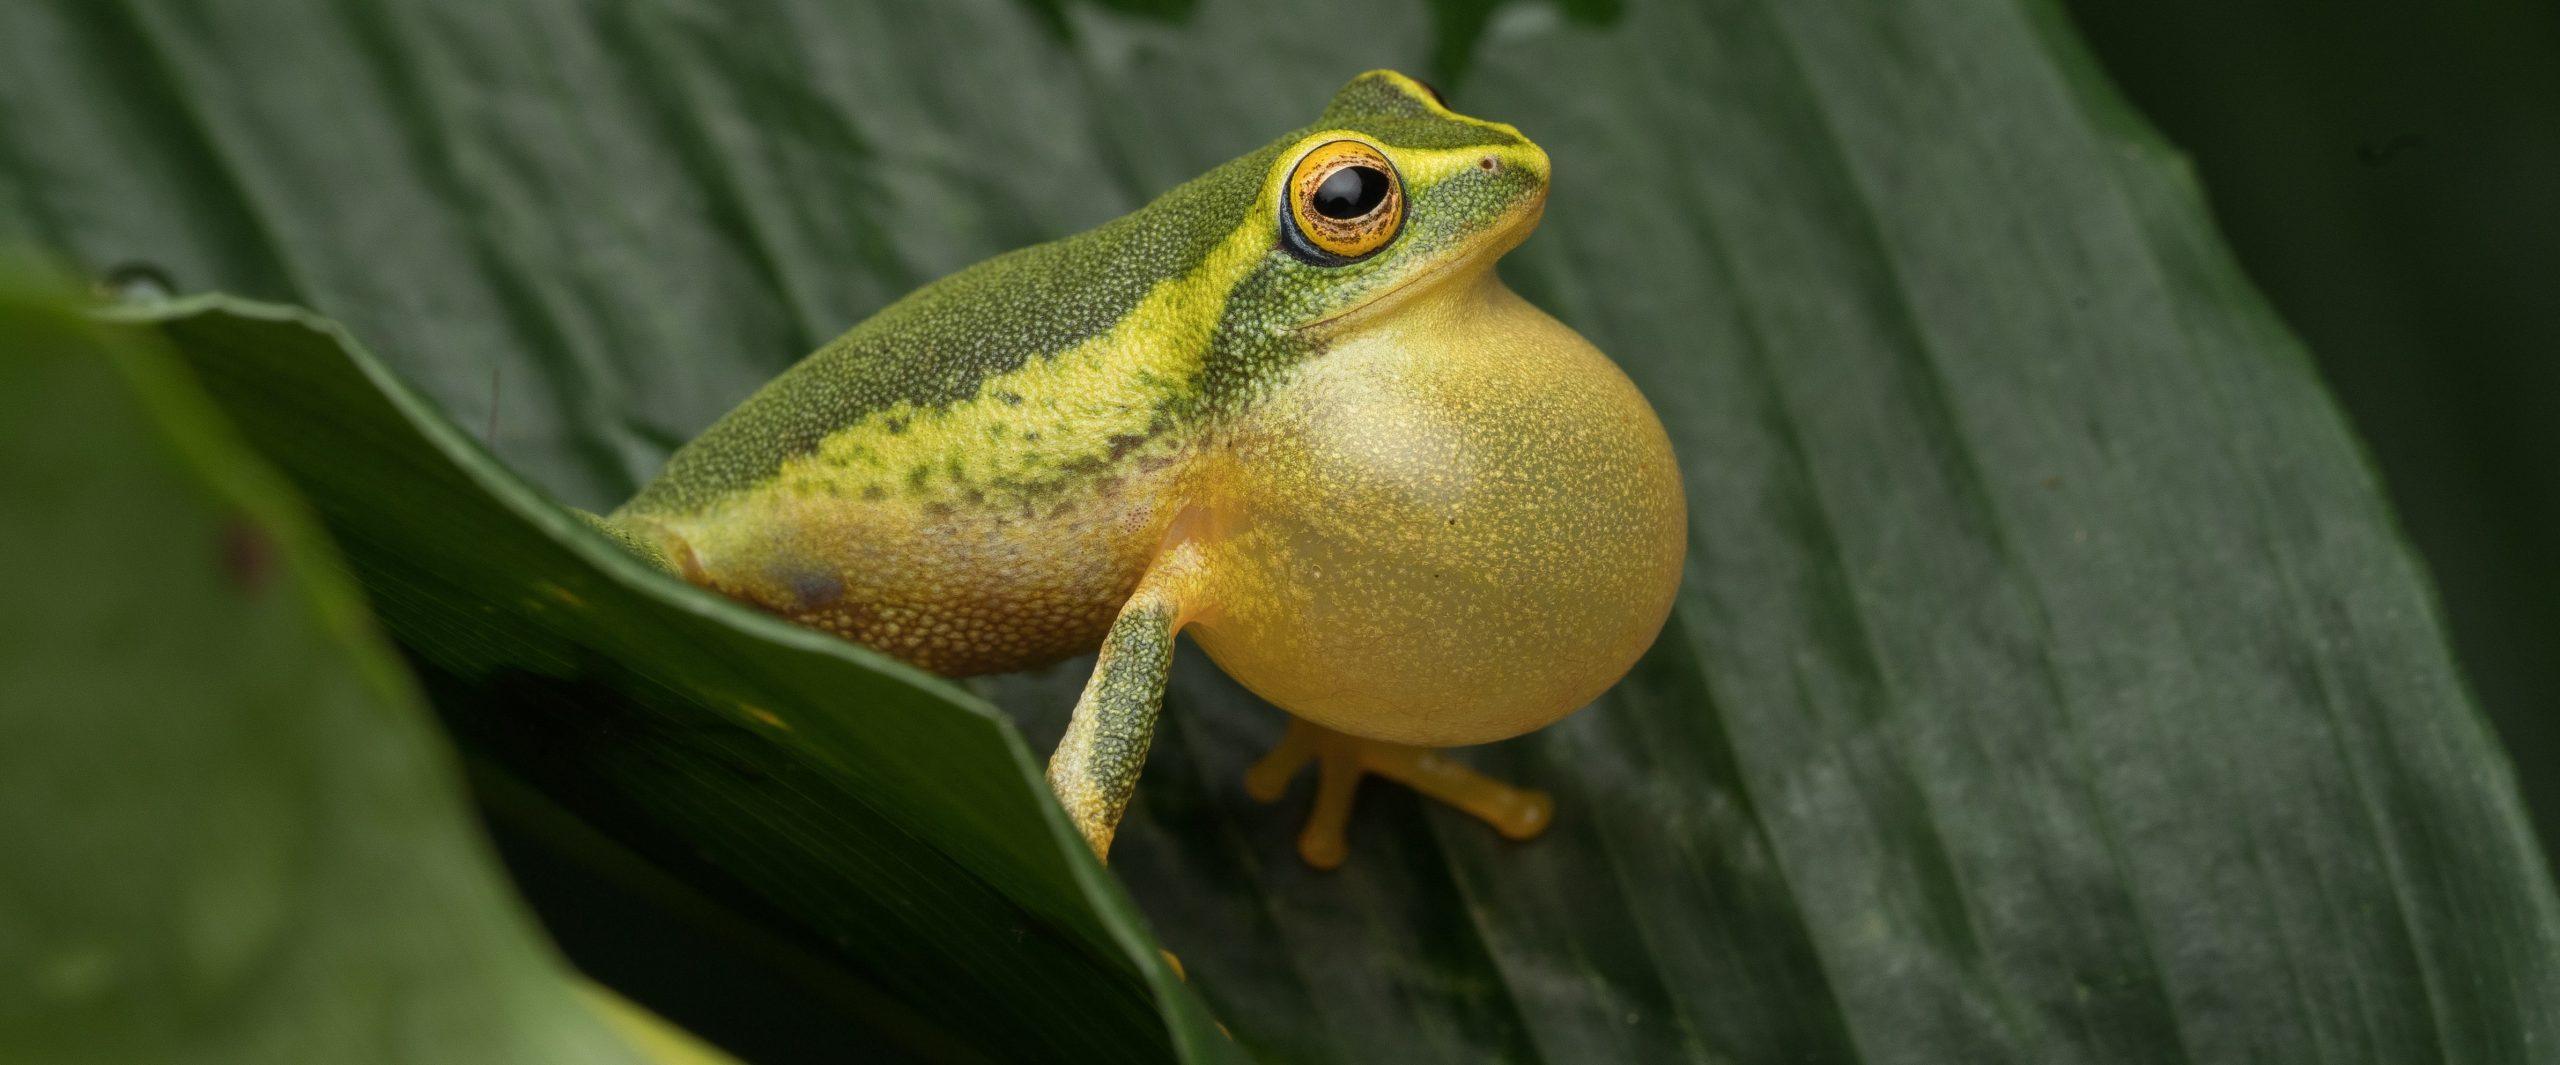 Frogs Amidst Cardamom Plantations: Blessing or A Bane? - Wildlife